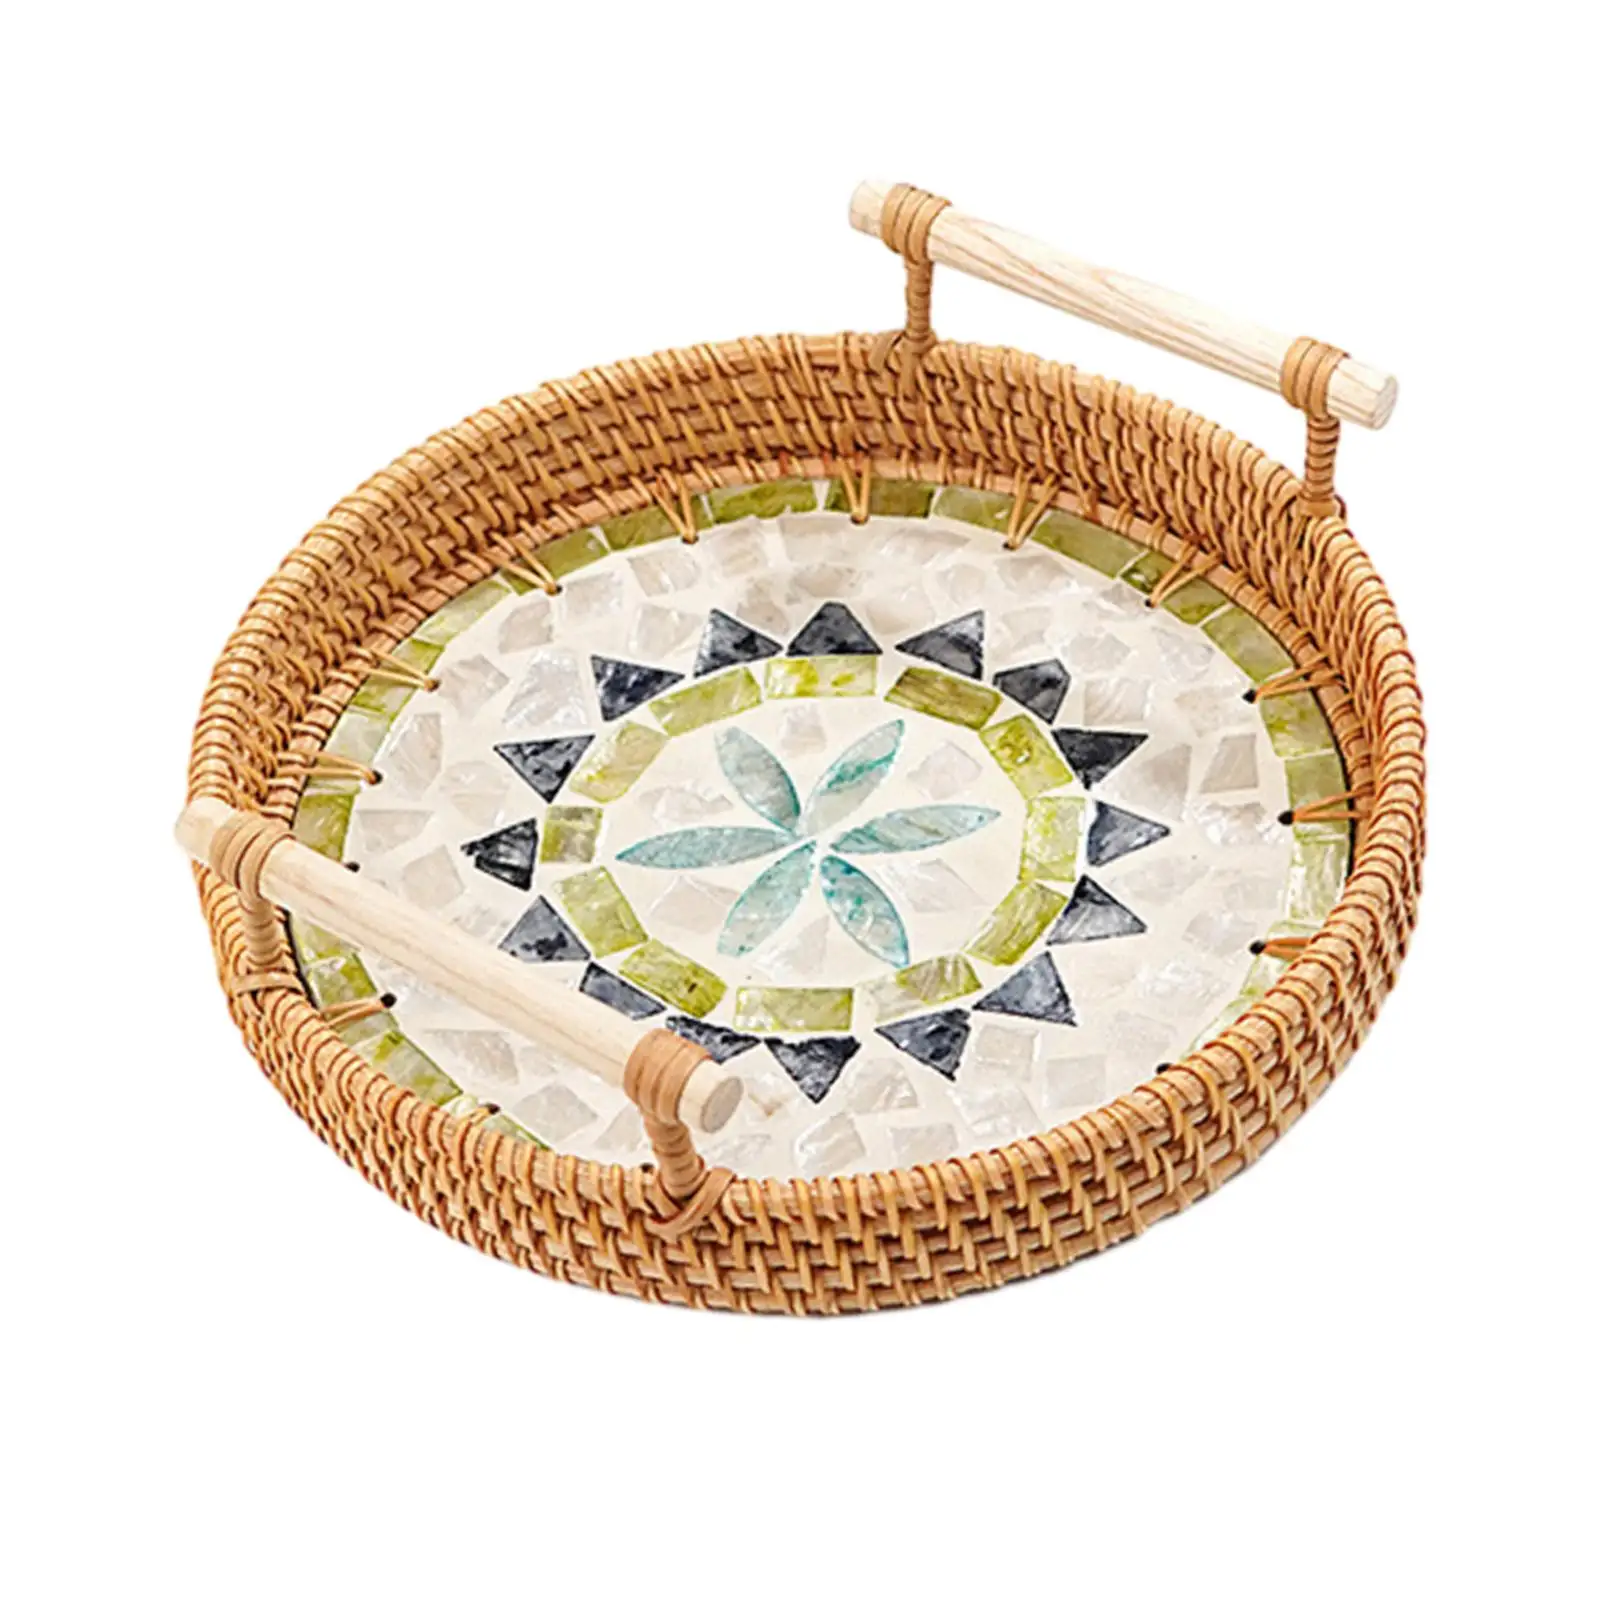 Rattan Serving Tray Decorative Storage Tray for Afternoon Tea Coffee Table